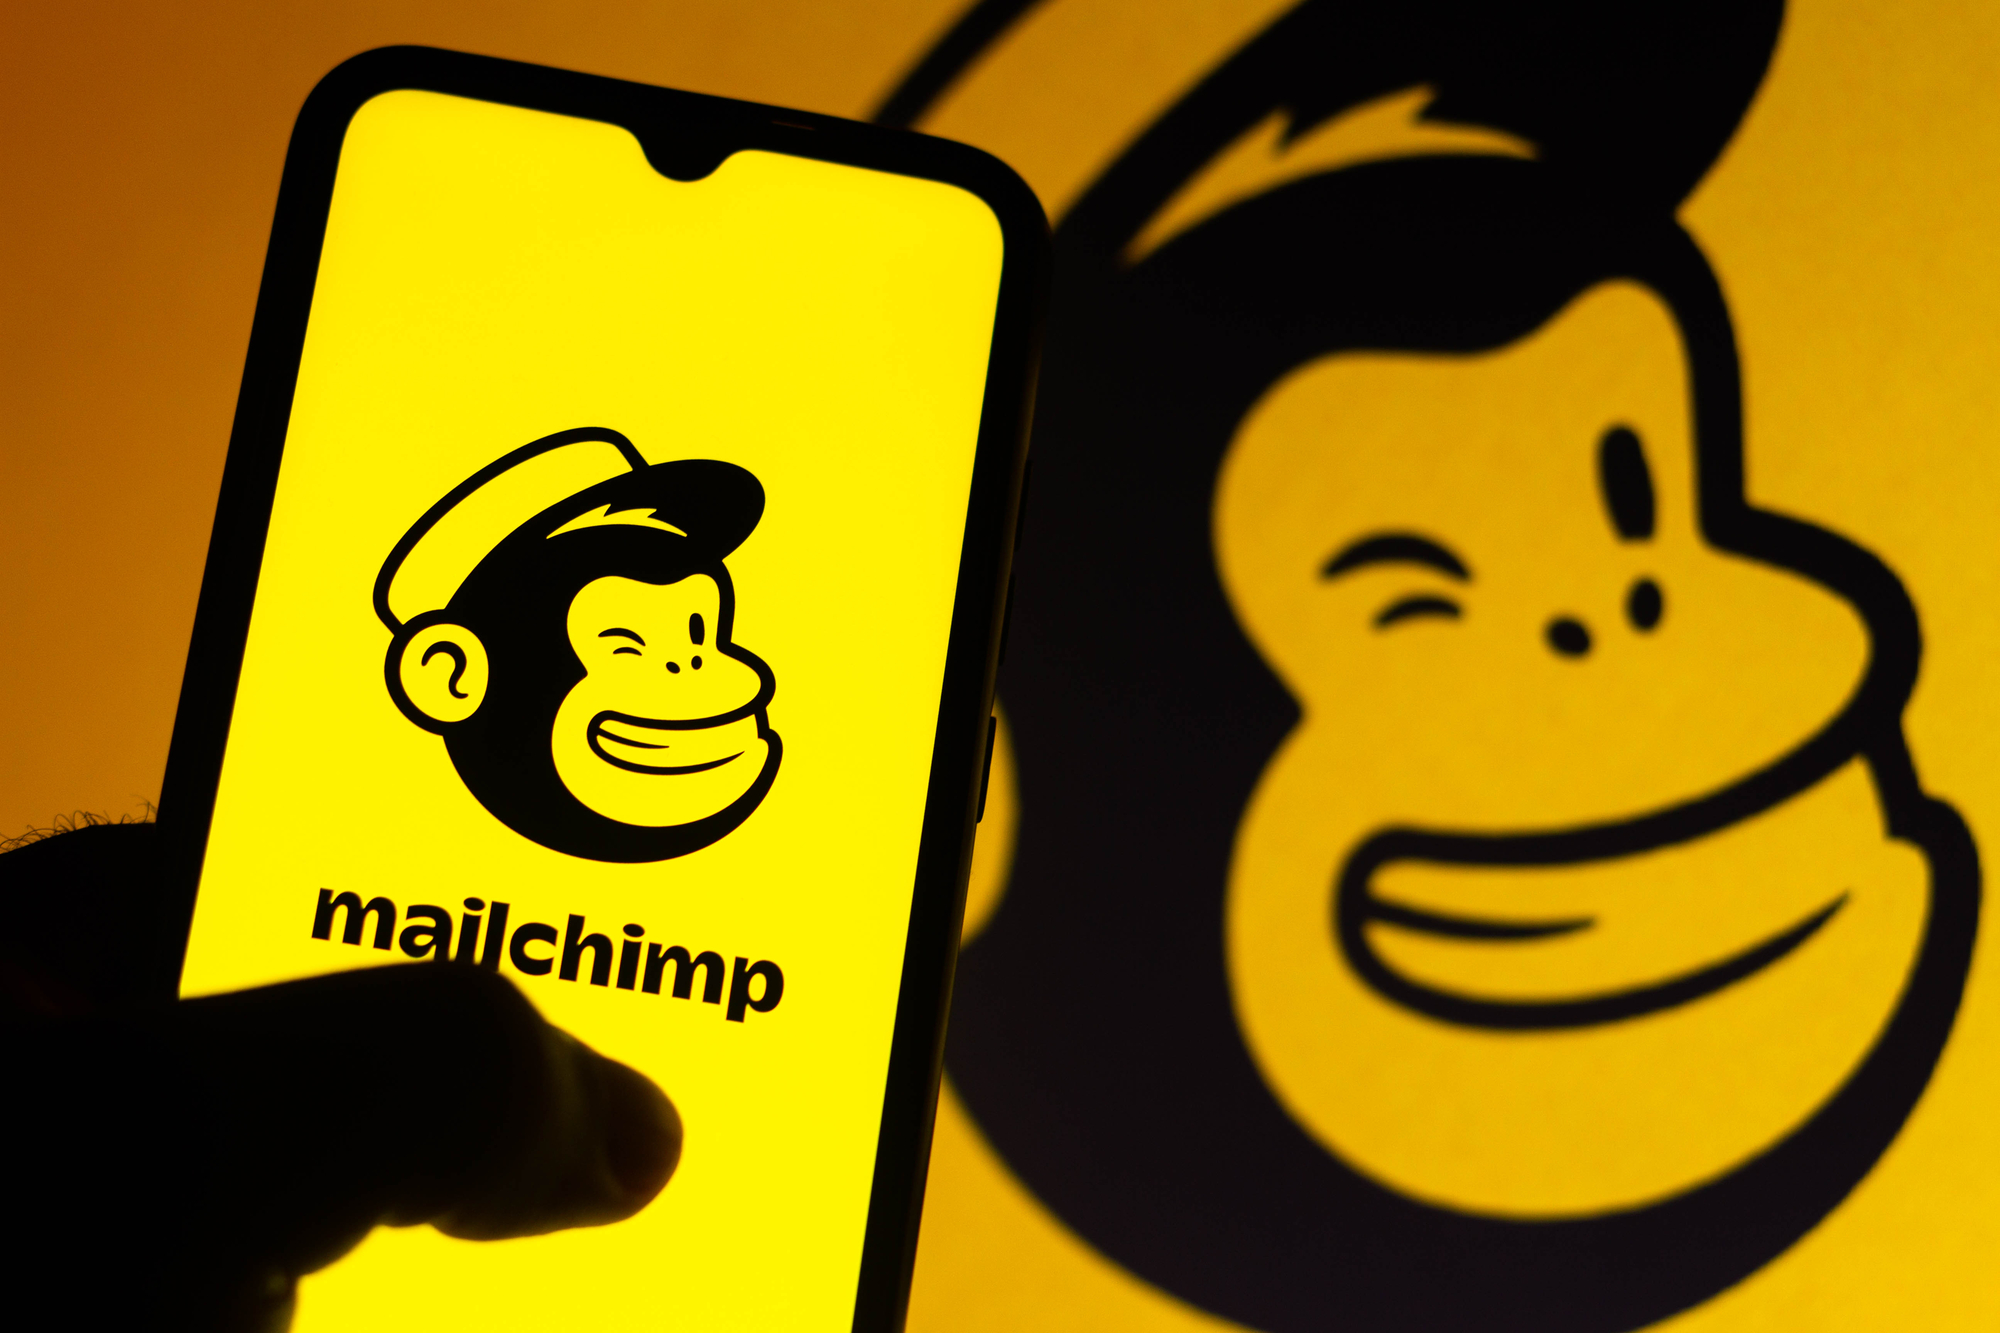 person holding a cellphone with mailchimp logo on the screen and at the background